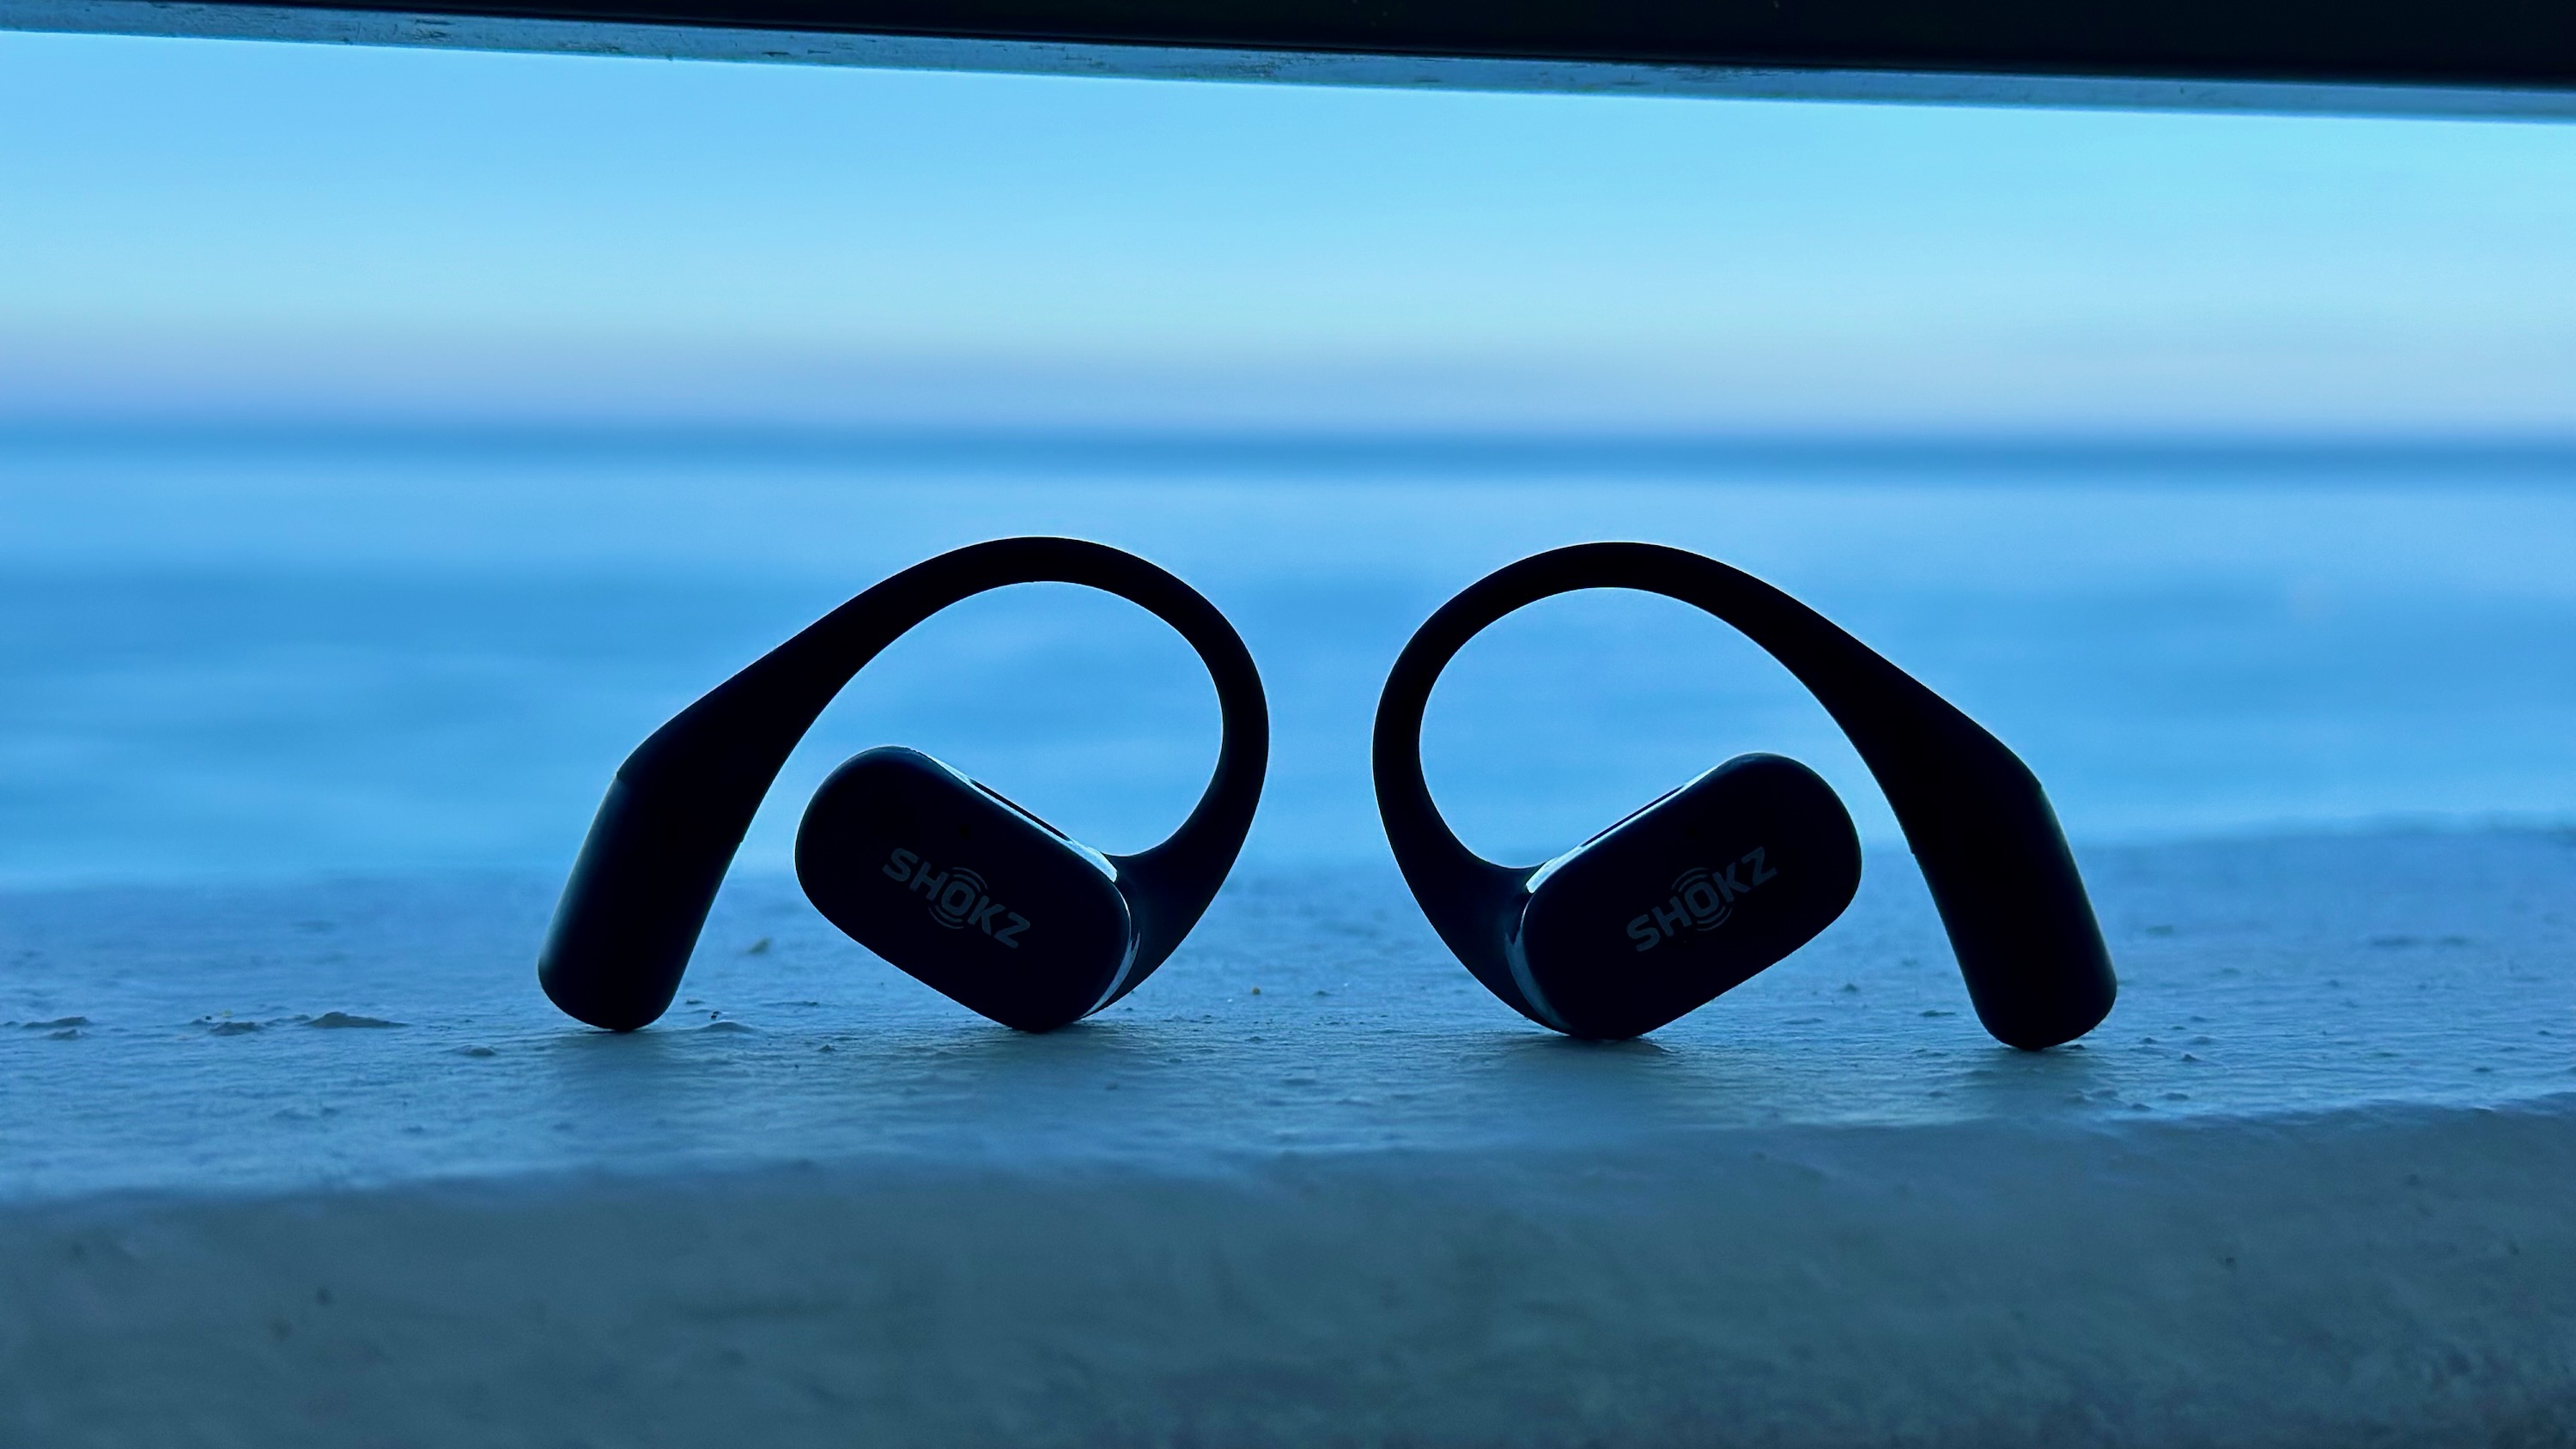 The Shokz OpenFit sitting upright in front of the ocean